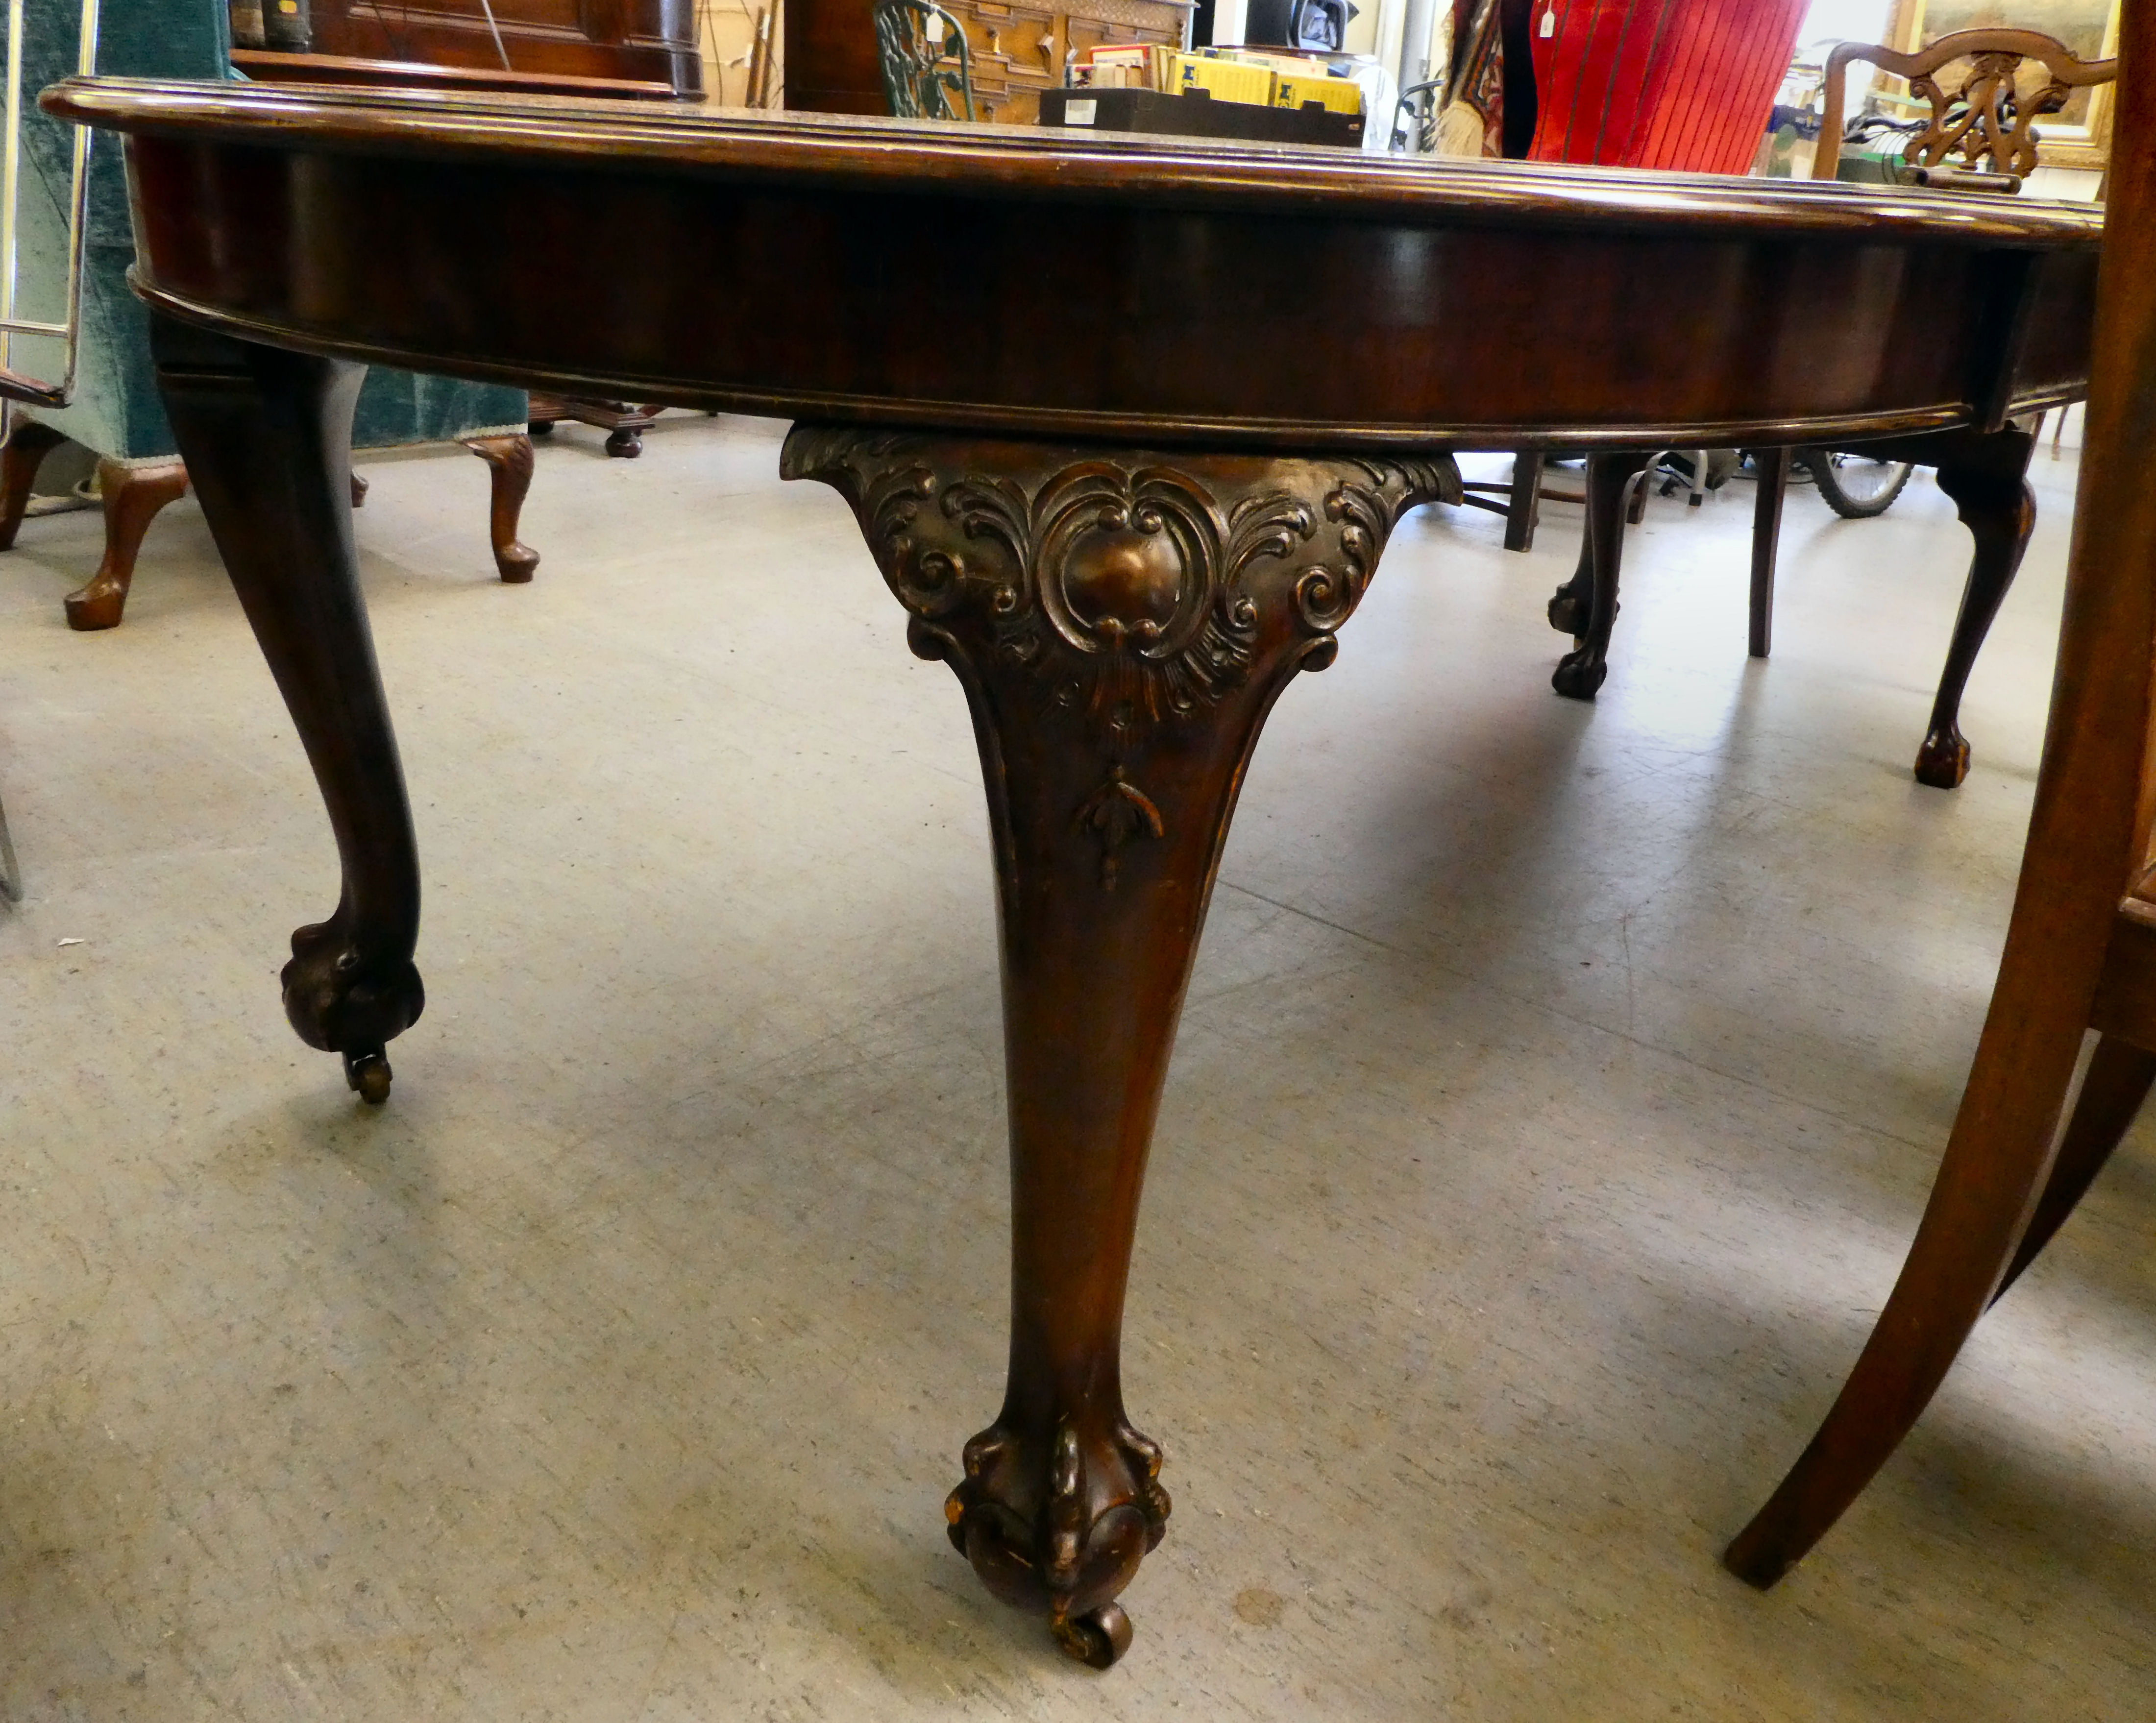 A 1920s mahogany wind-out dining table, raised on cabriole legs, talon and ball feet  29"h  46"L - Image 5 of 5